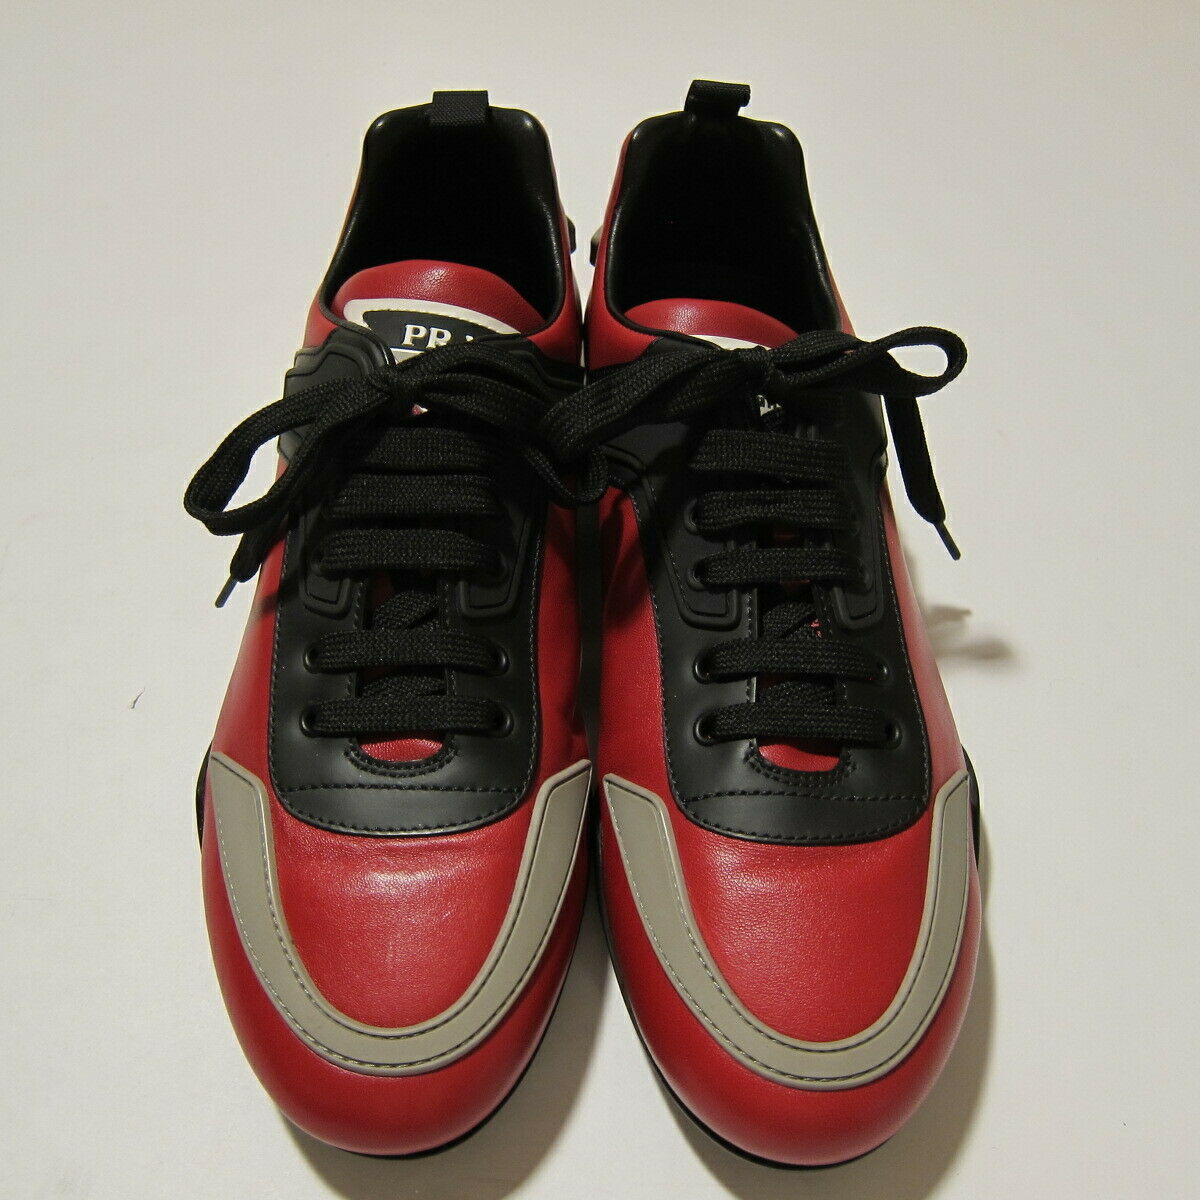 S-2479198 New Prada Red Soft Leather Lace up Sneaker Shoes Size marked 8 US 9 - Casual Shoes